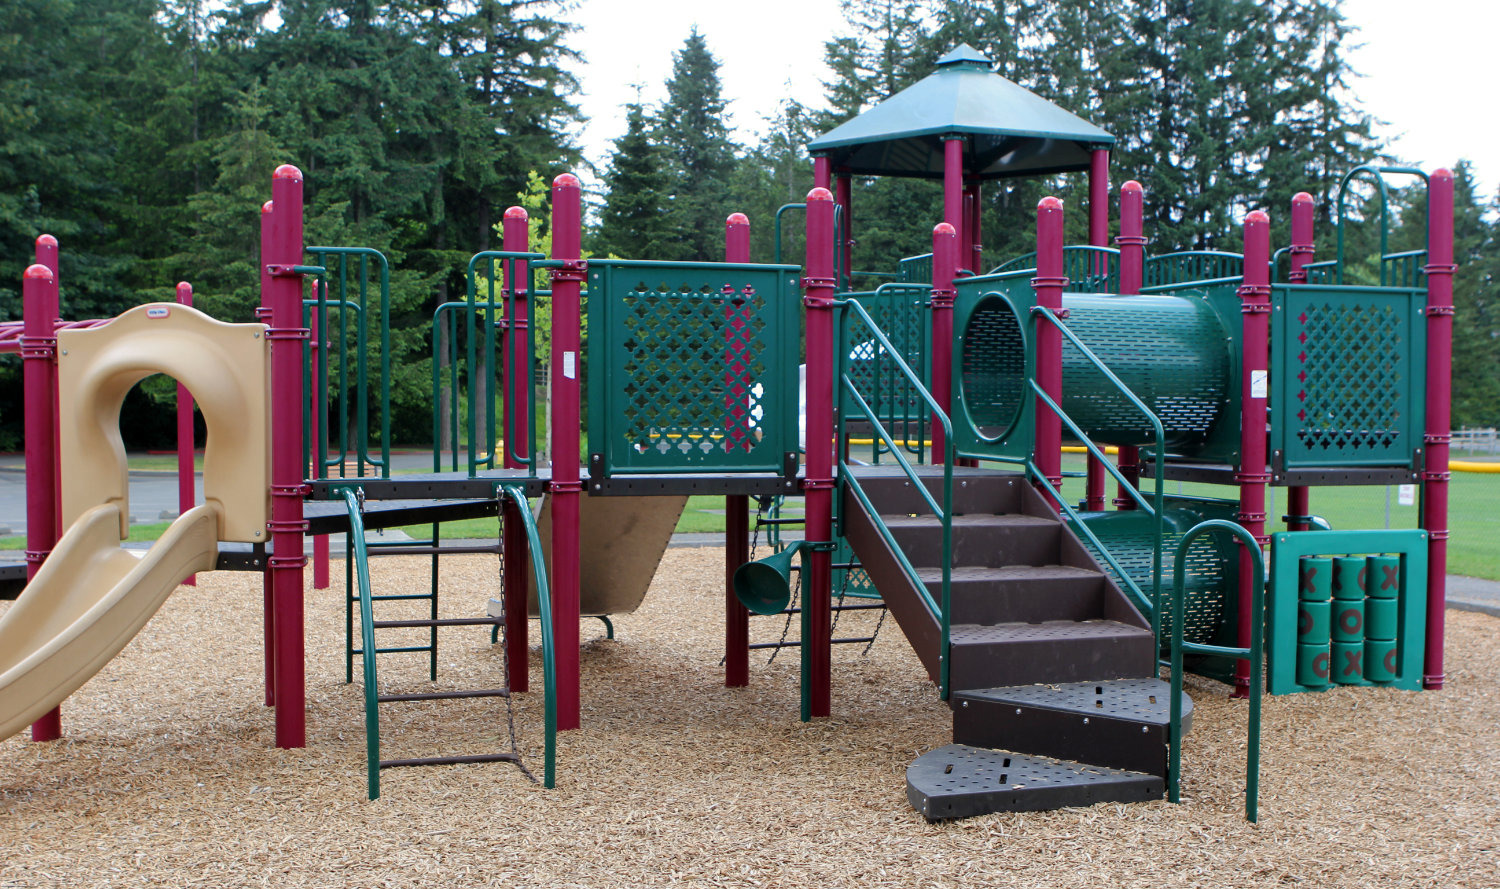 Outdoor playground unit at Beaver Lake Park containing slides, steps, crawling tunnels, and a tic-tac-toe game board.